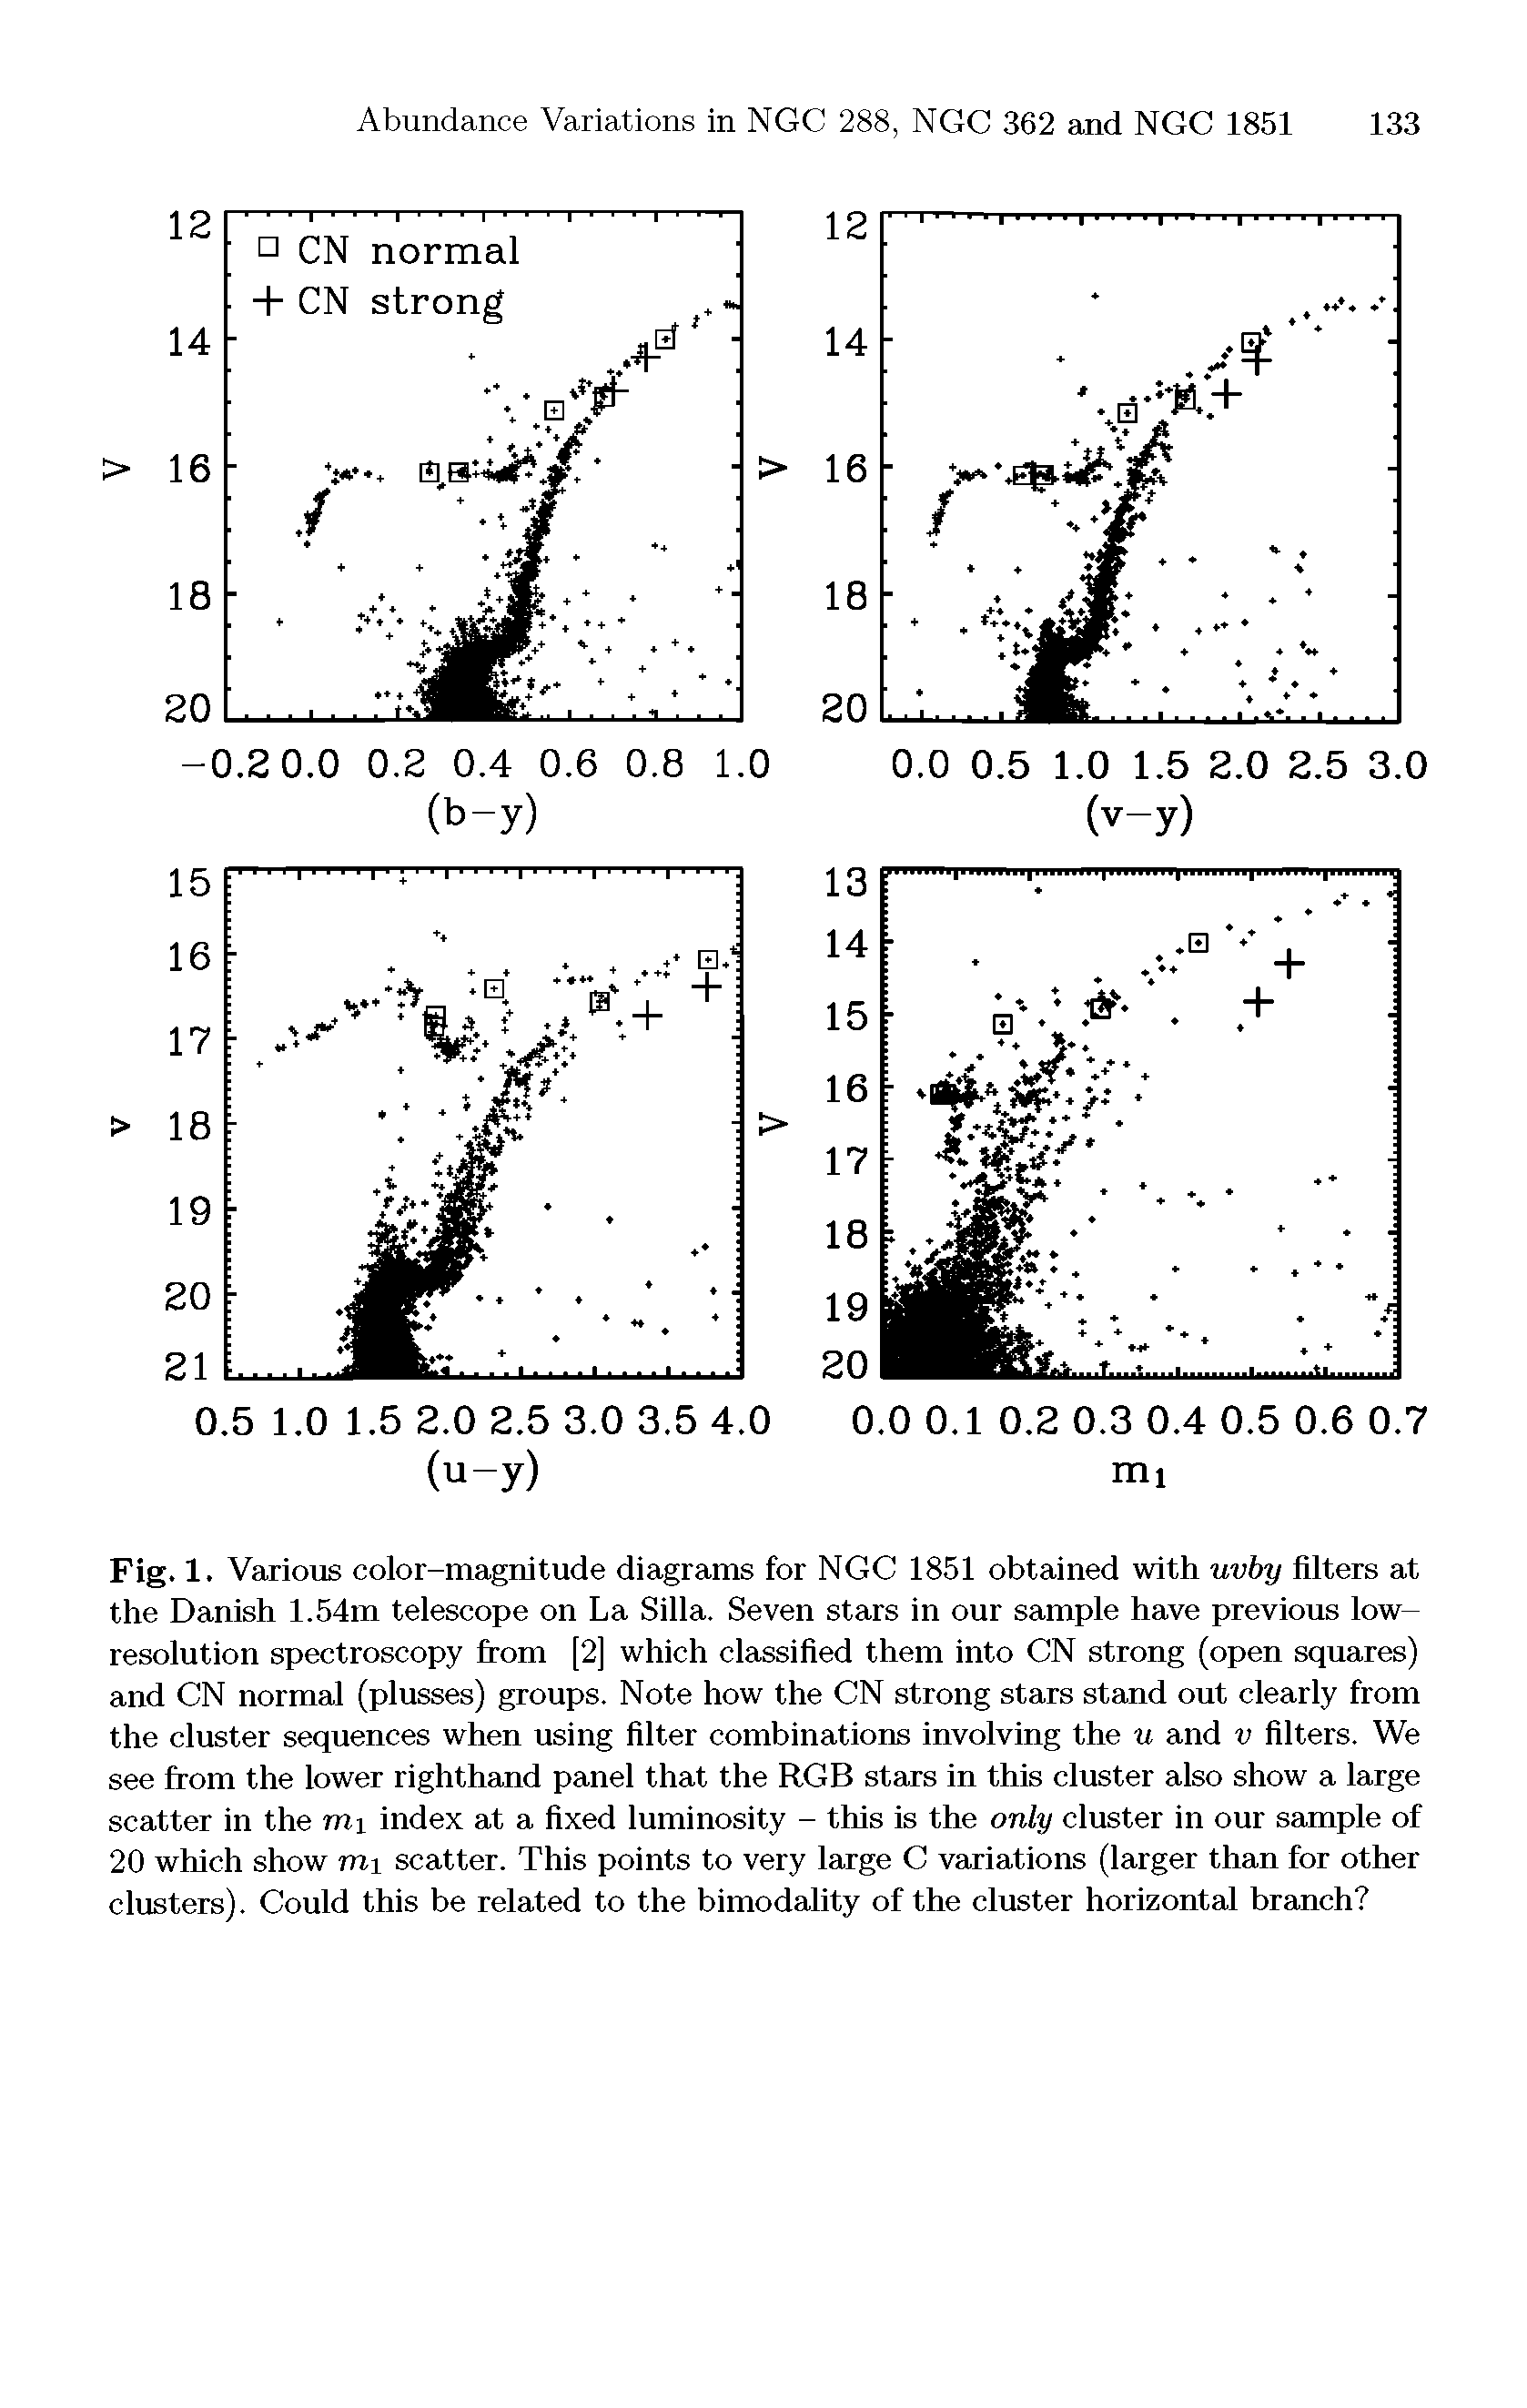 Fig. 1. Various color-magnitude diagrams for NGC 1851 obtained with uvby filters at the Danish 1.54m telescope on La Silla. Seven stars in our sample have previous low-resolution spectroscopy from [2] which classified them into CN strong (open squares) and CN normal (plusses) groups. Note how the CN strong stars stand out clearly from the cluster sequences when using filter combinations involving the u and v filters. We see from the lower righthand panel that the RGB stars in this cluster also show a large scatter in the mi index at a fixed luminosity - this is the only cluster in our sample of 20 which show mi scatter. This points to very large C variations (larger than for other clusters). Could this be related to the bimodality of the cluster horizontal branch ...